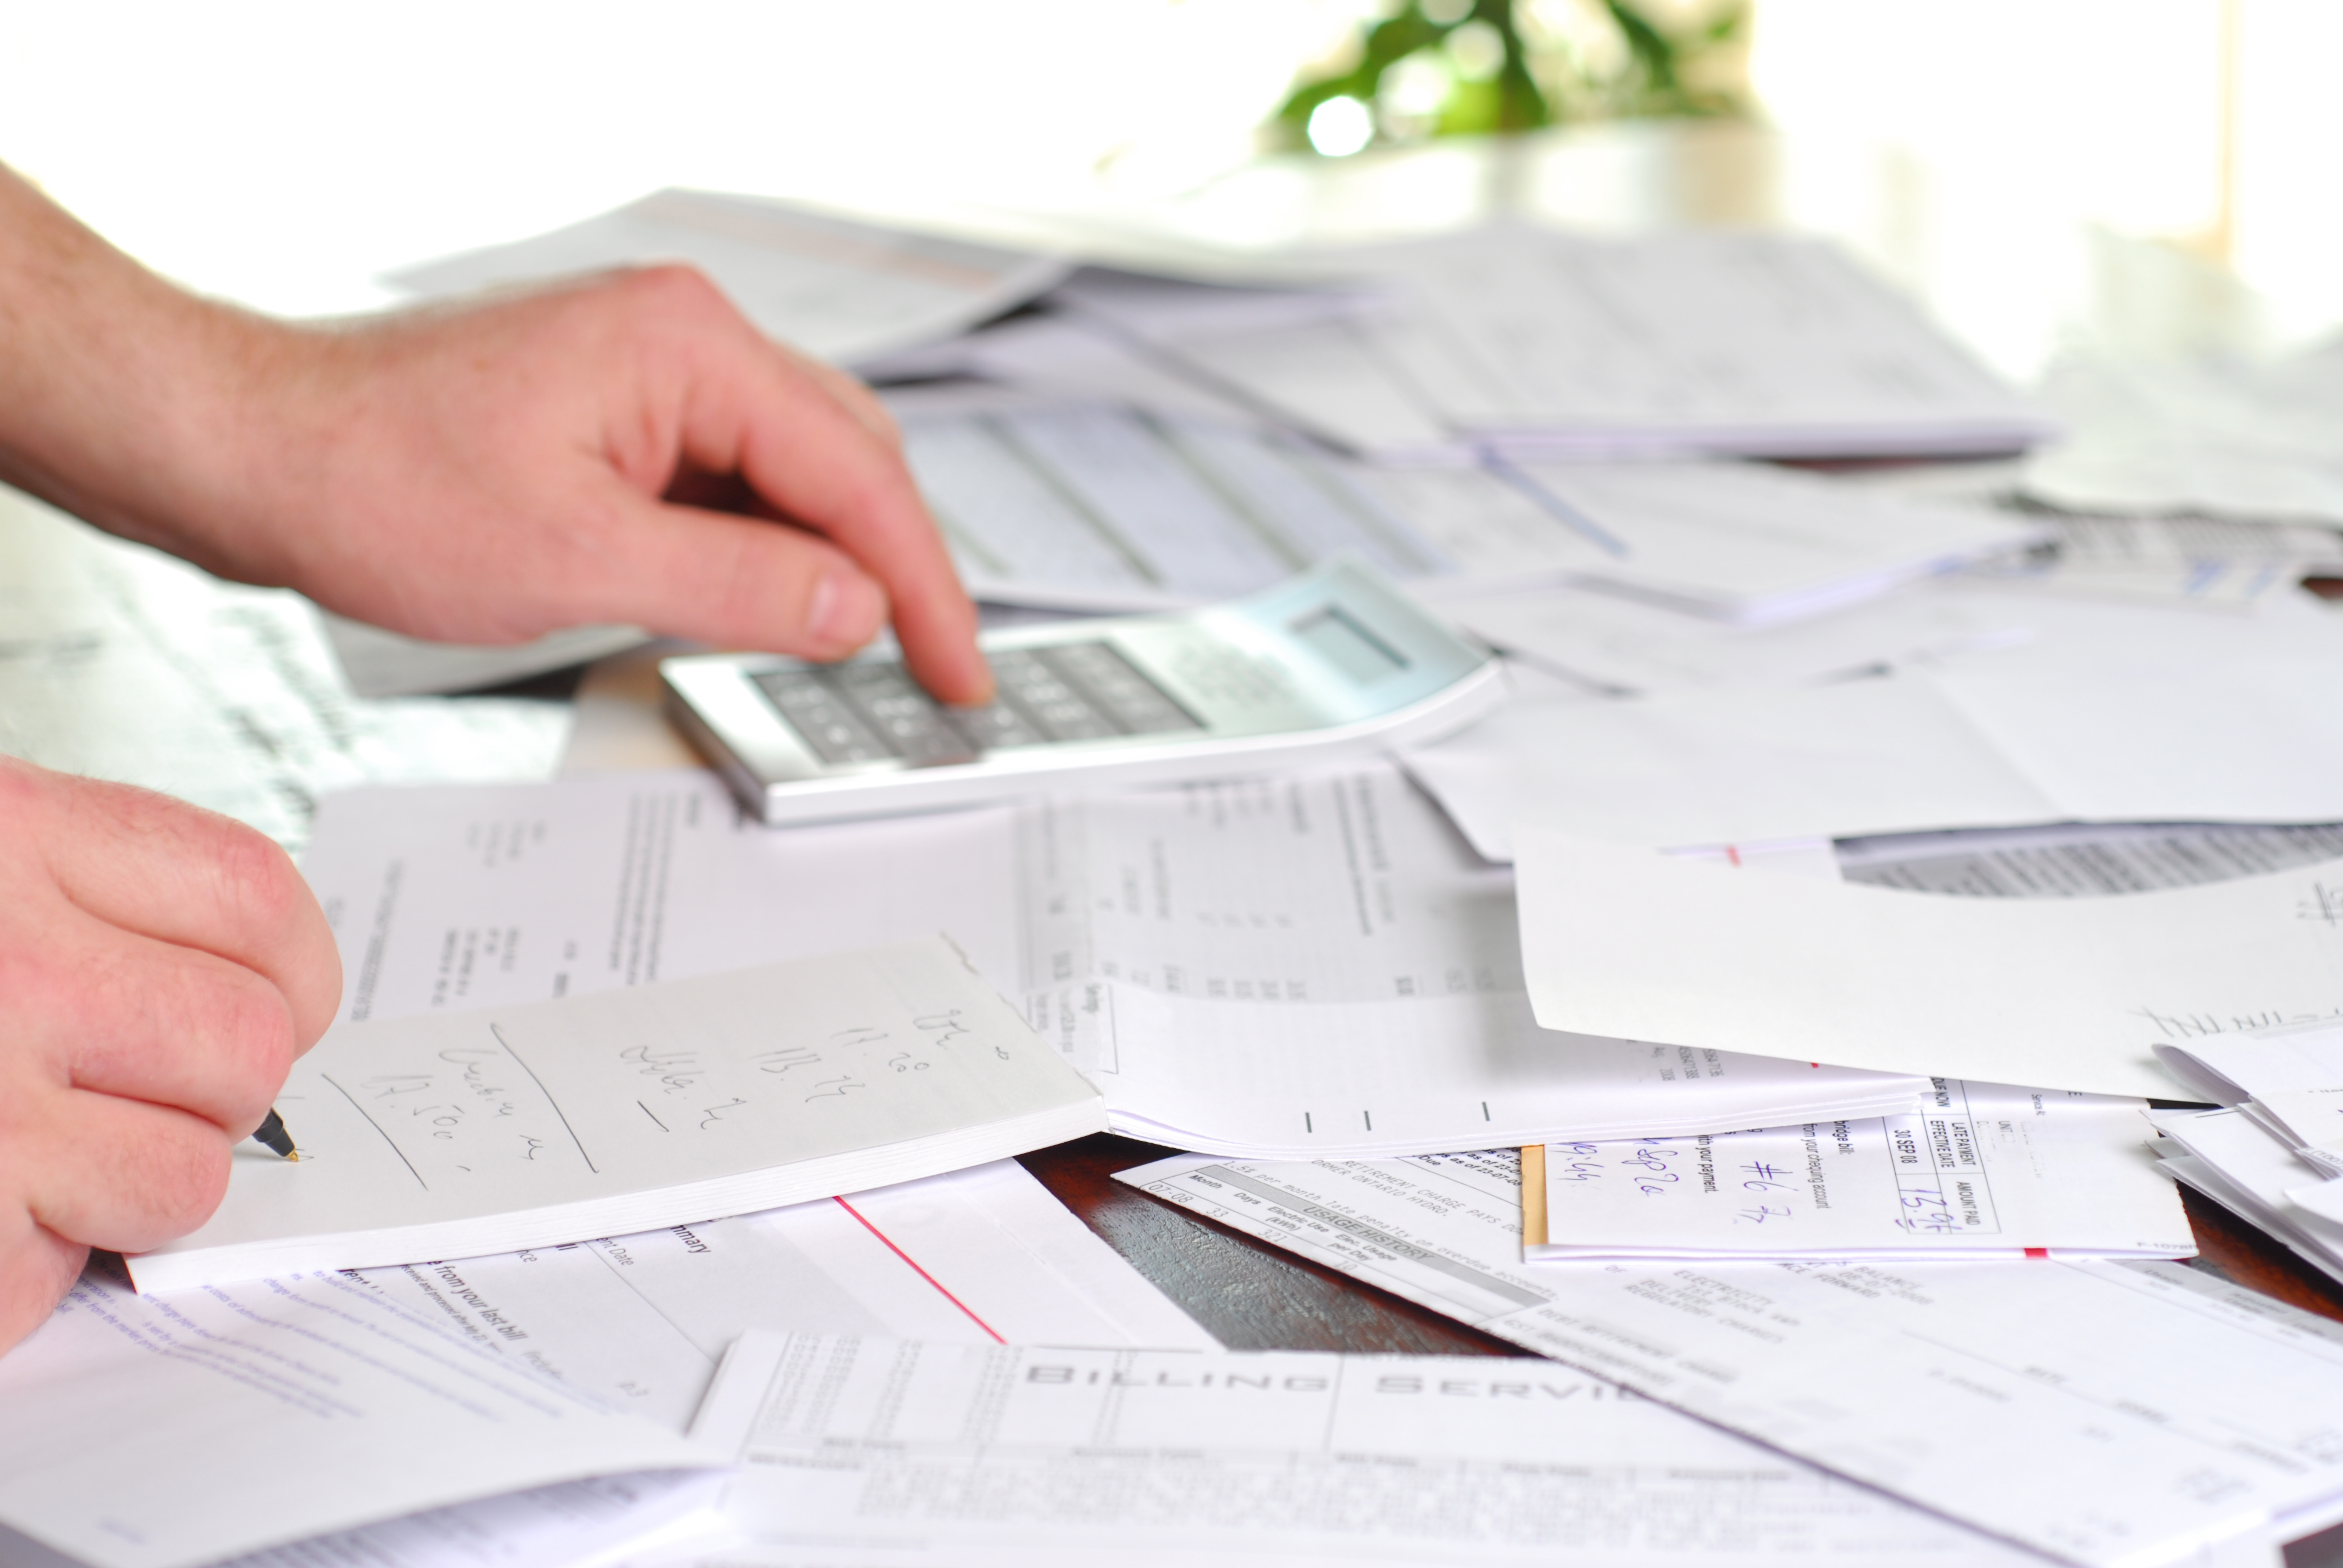 finding billing errors with utility bill auditing